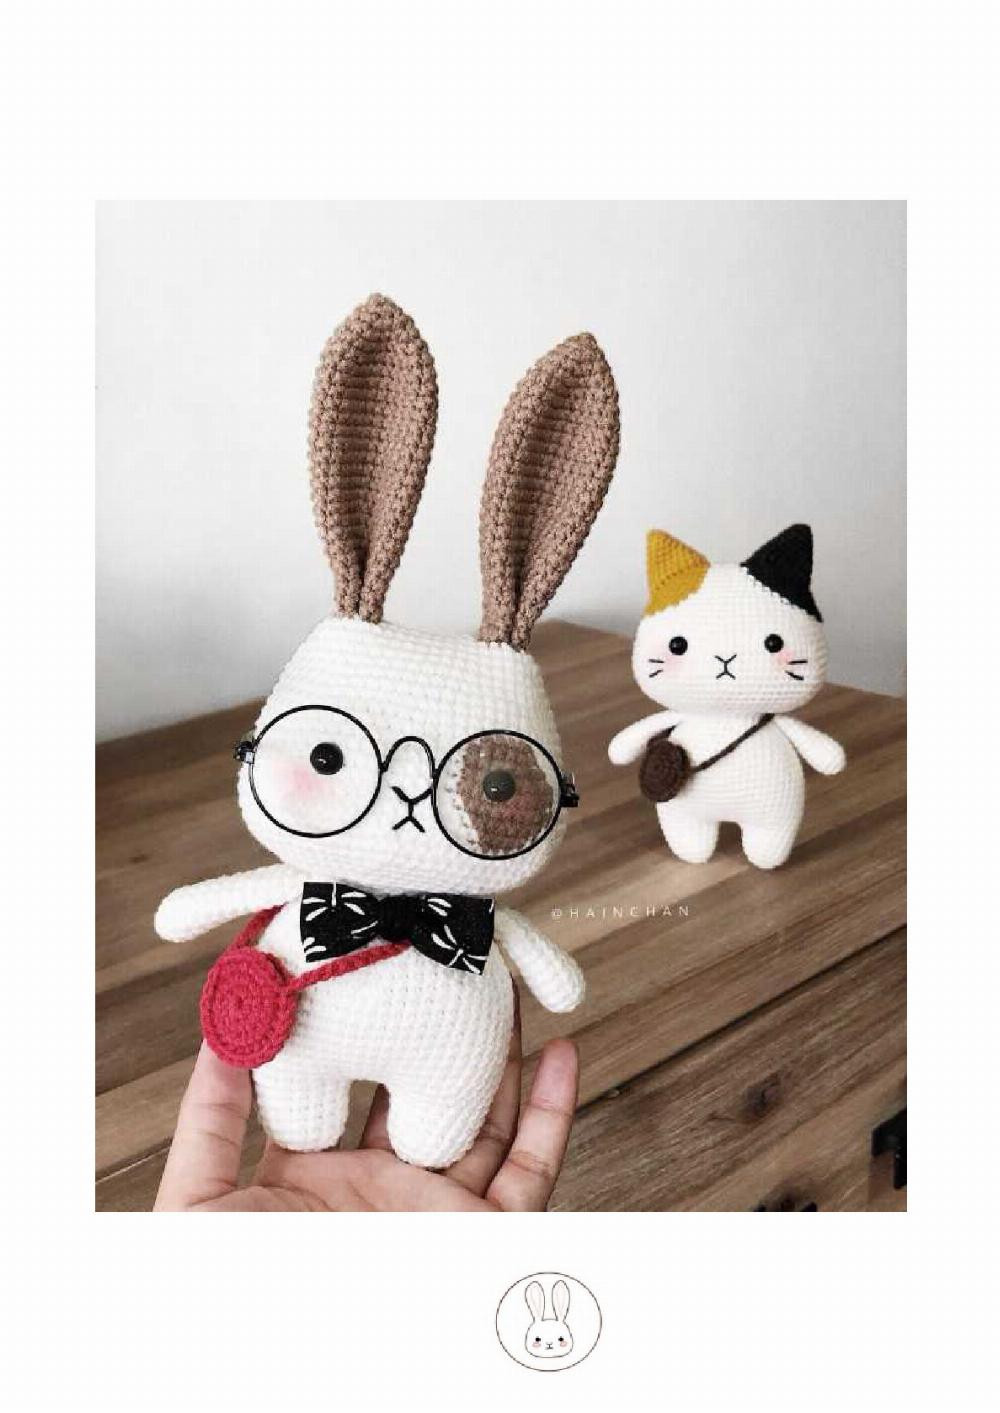 NANA THE BUNNY , rey the little bunny, cat keychain, hello kitty, calio cat, lilac bicolor catscotish fold cat....